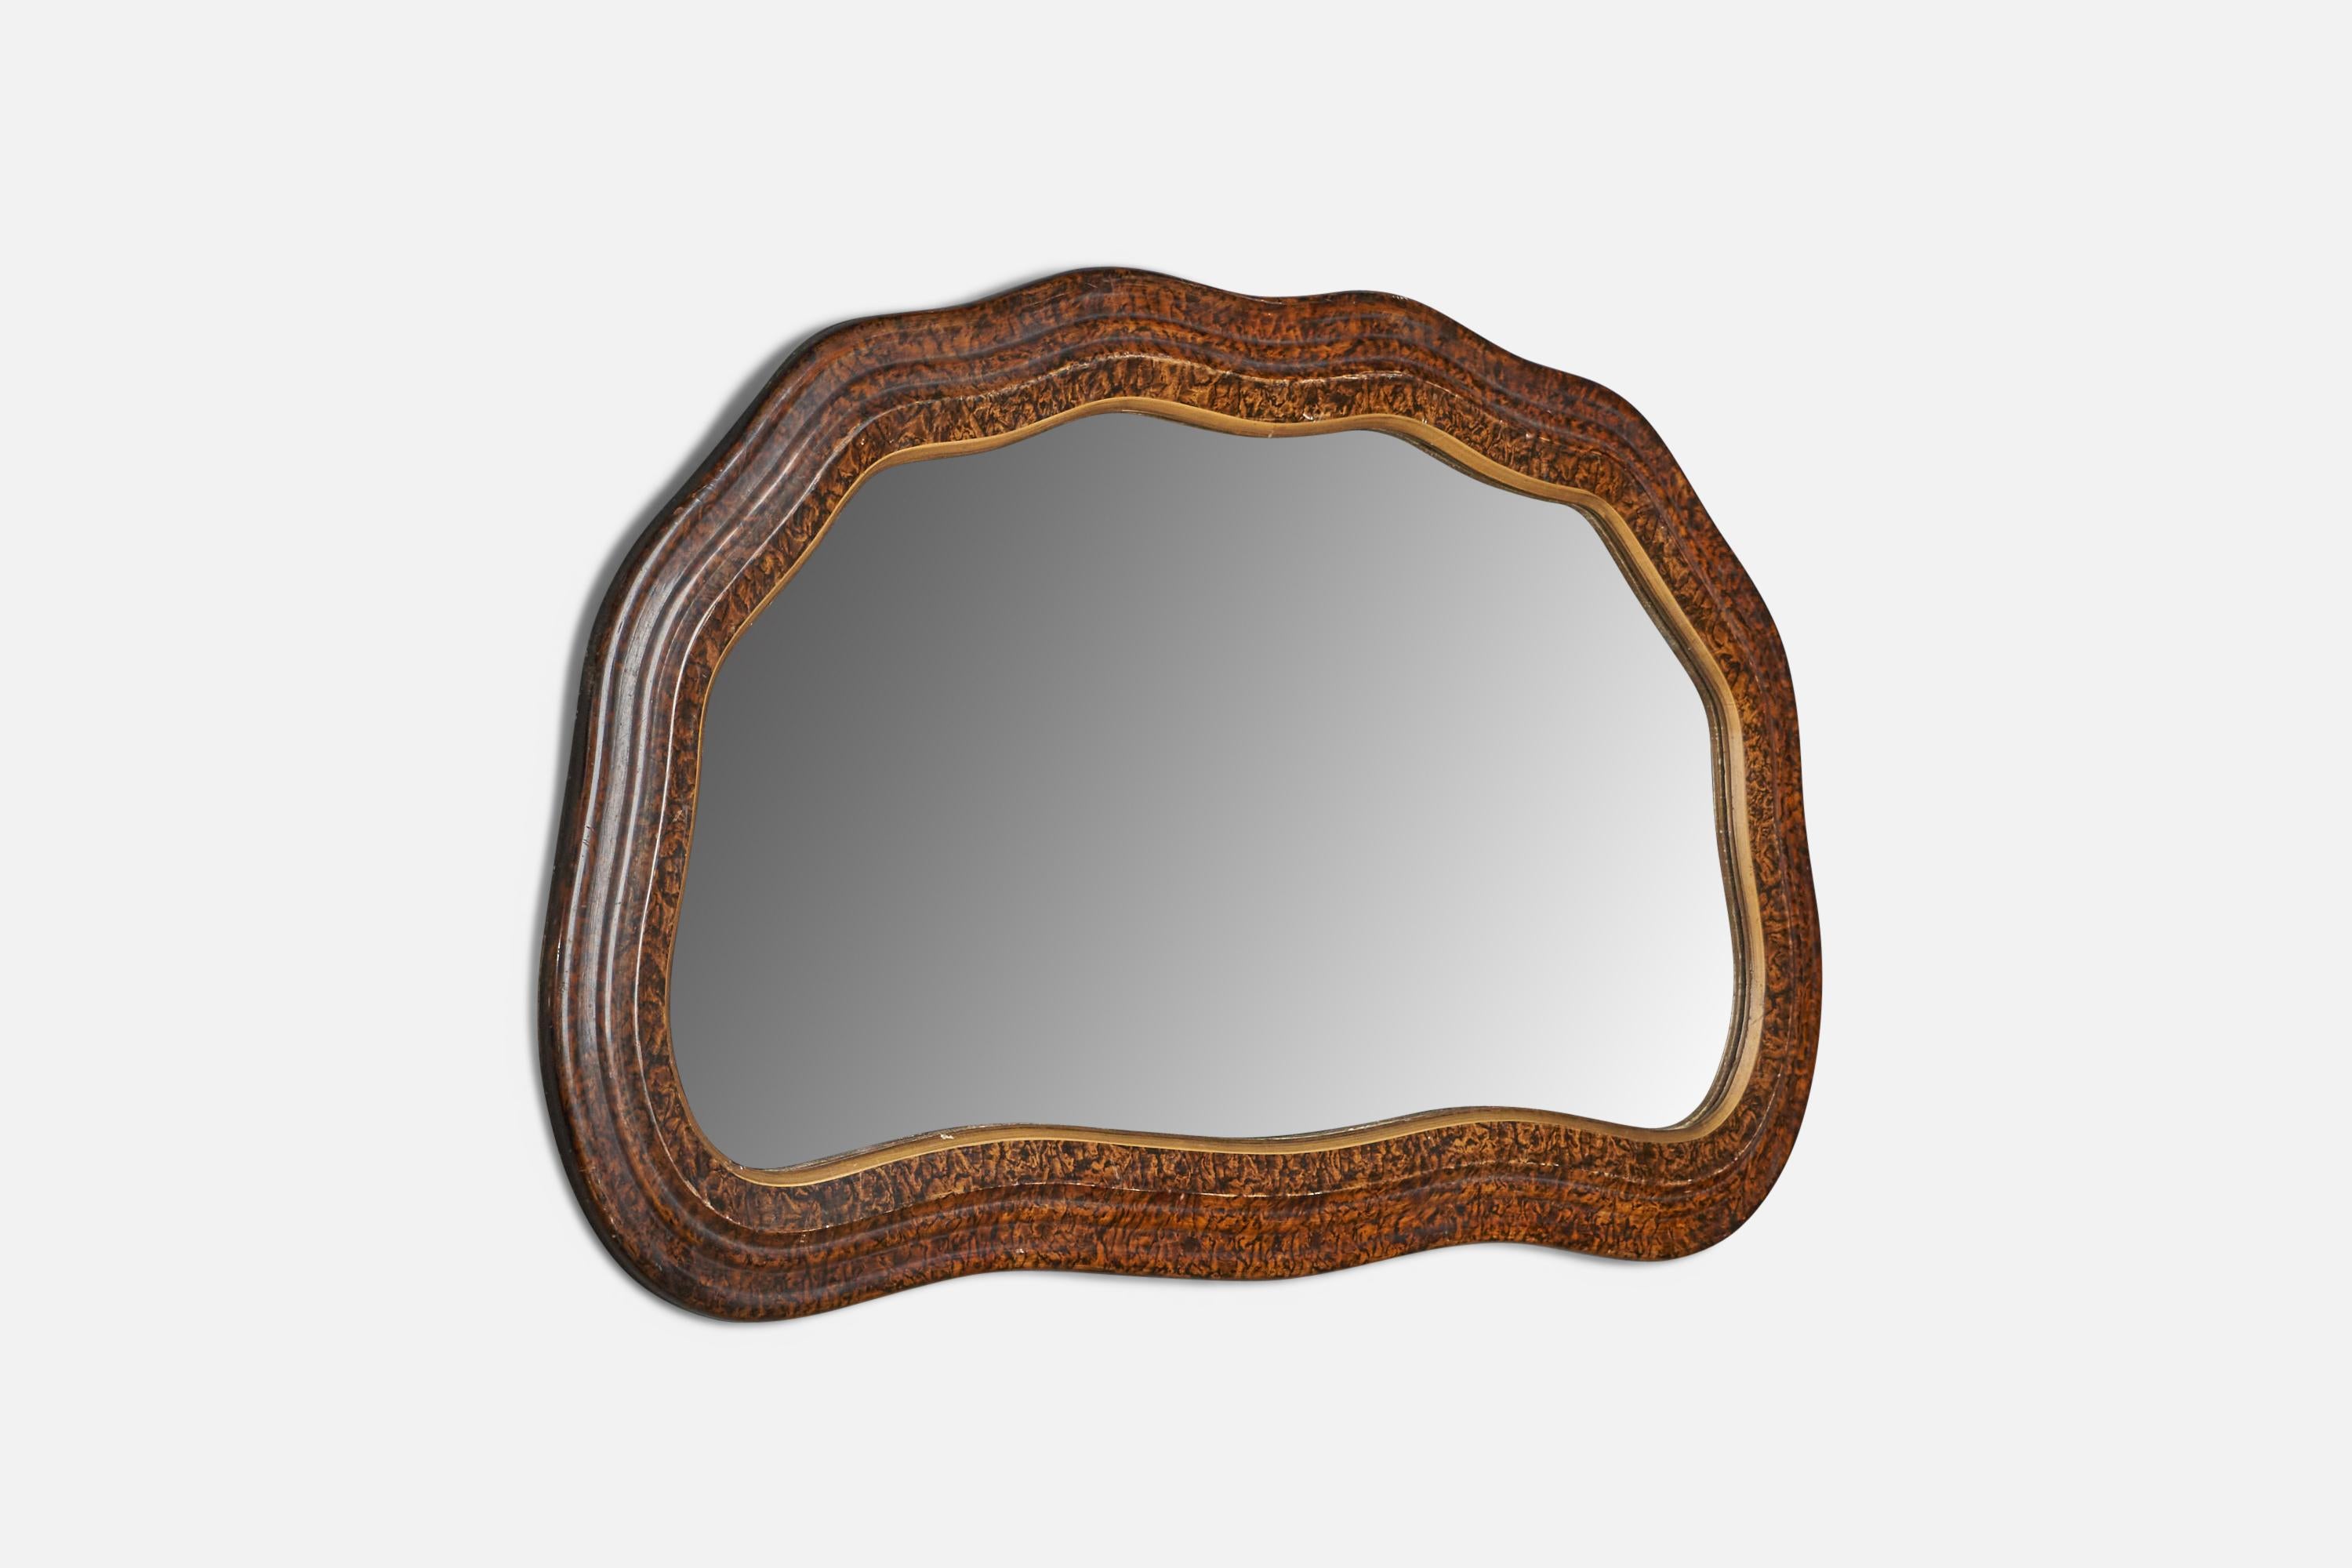 An organic burl wood wall mirror designed and produced in Italy, 1930s.